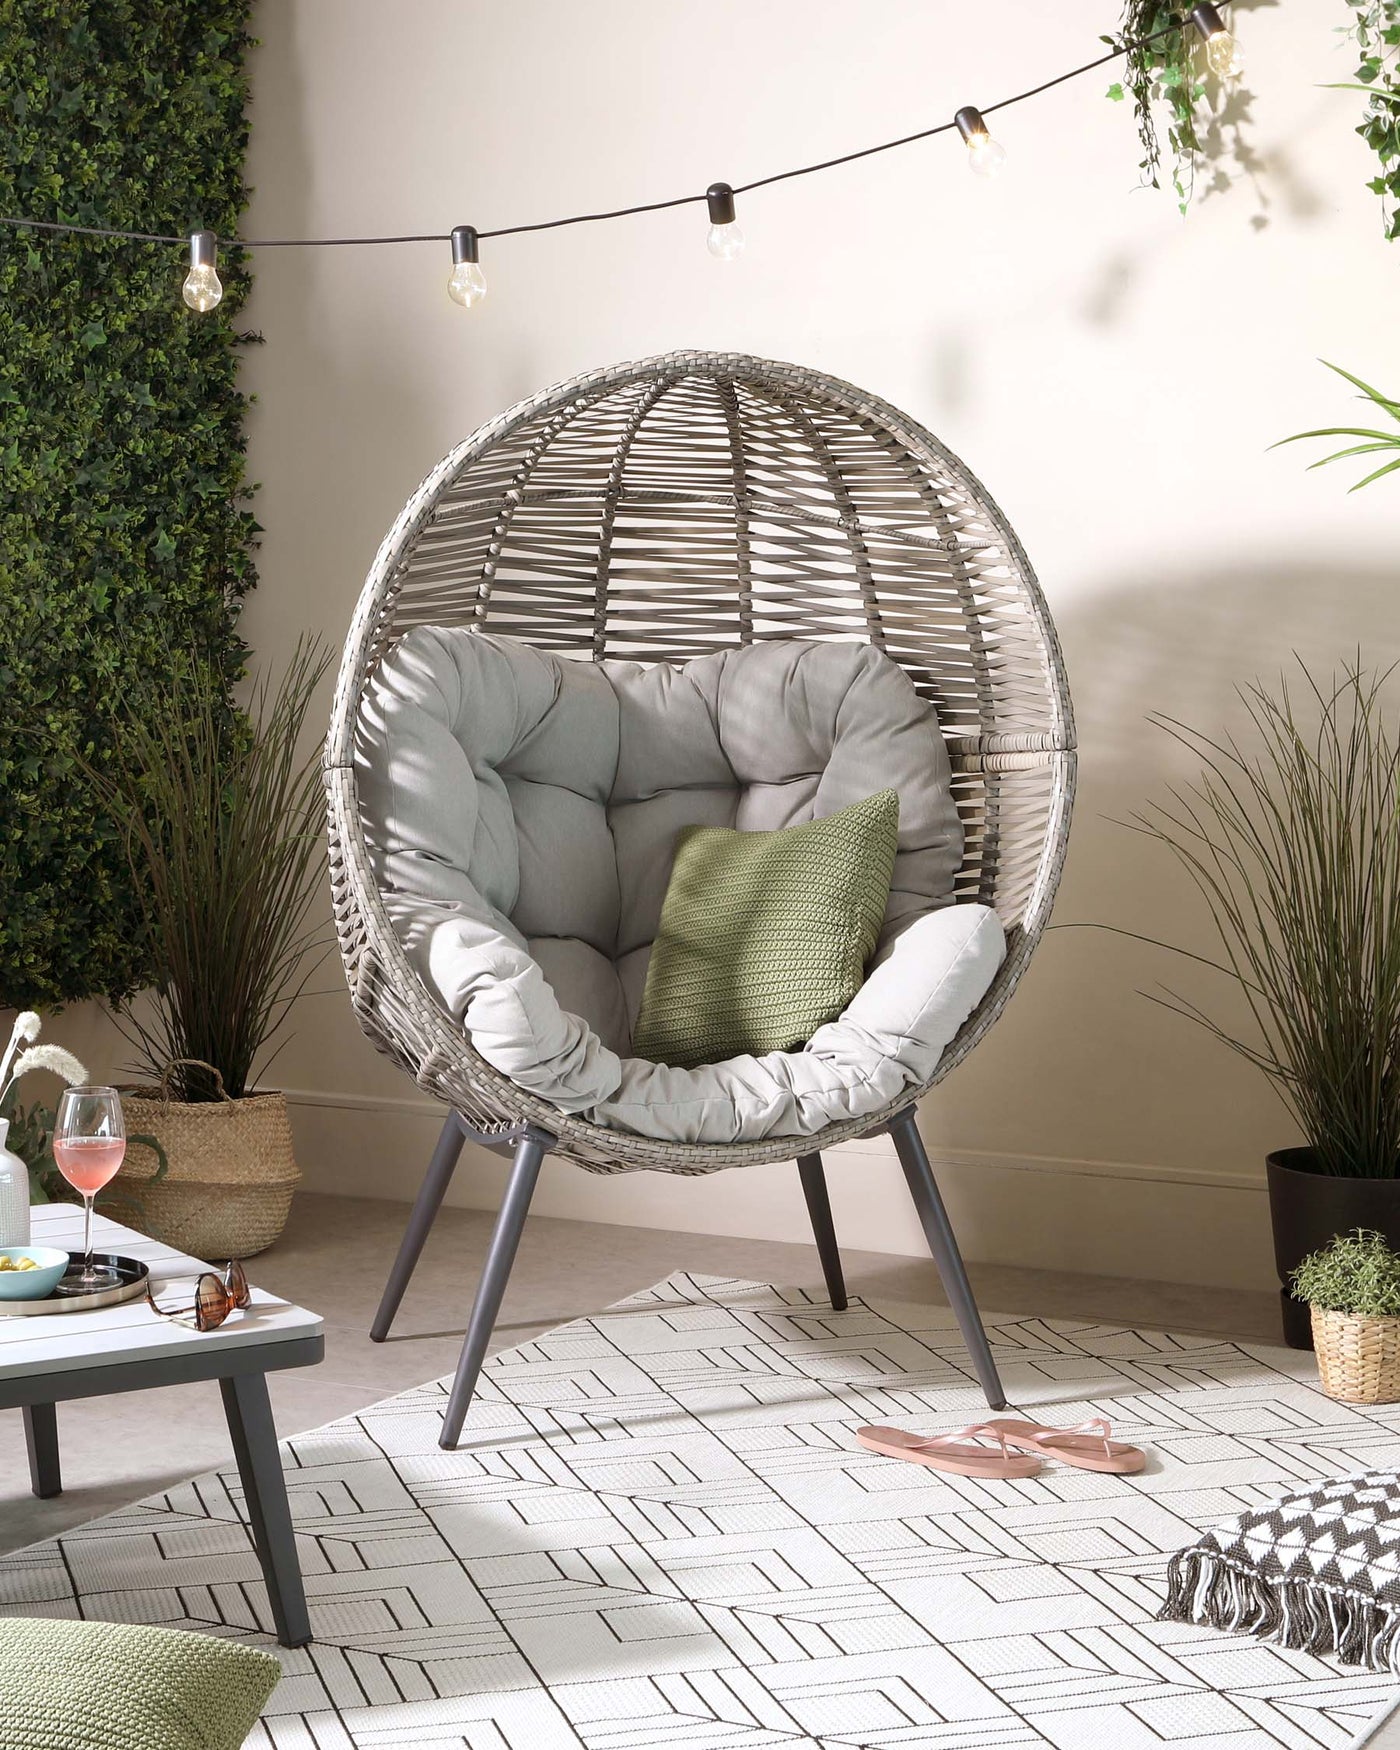 Egg-shaped wicker hanging chair with plush grey cushions, on a metal stand, complemented by a grey side table, placed on a patterned outdoor rug. The setting includes decorative outdoor string lights, green plants, and accent pillows, creating a cosy patio ambiance.